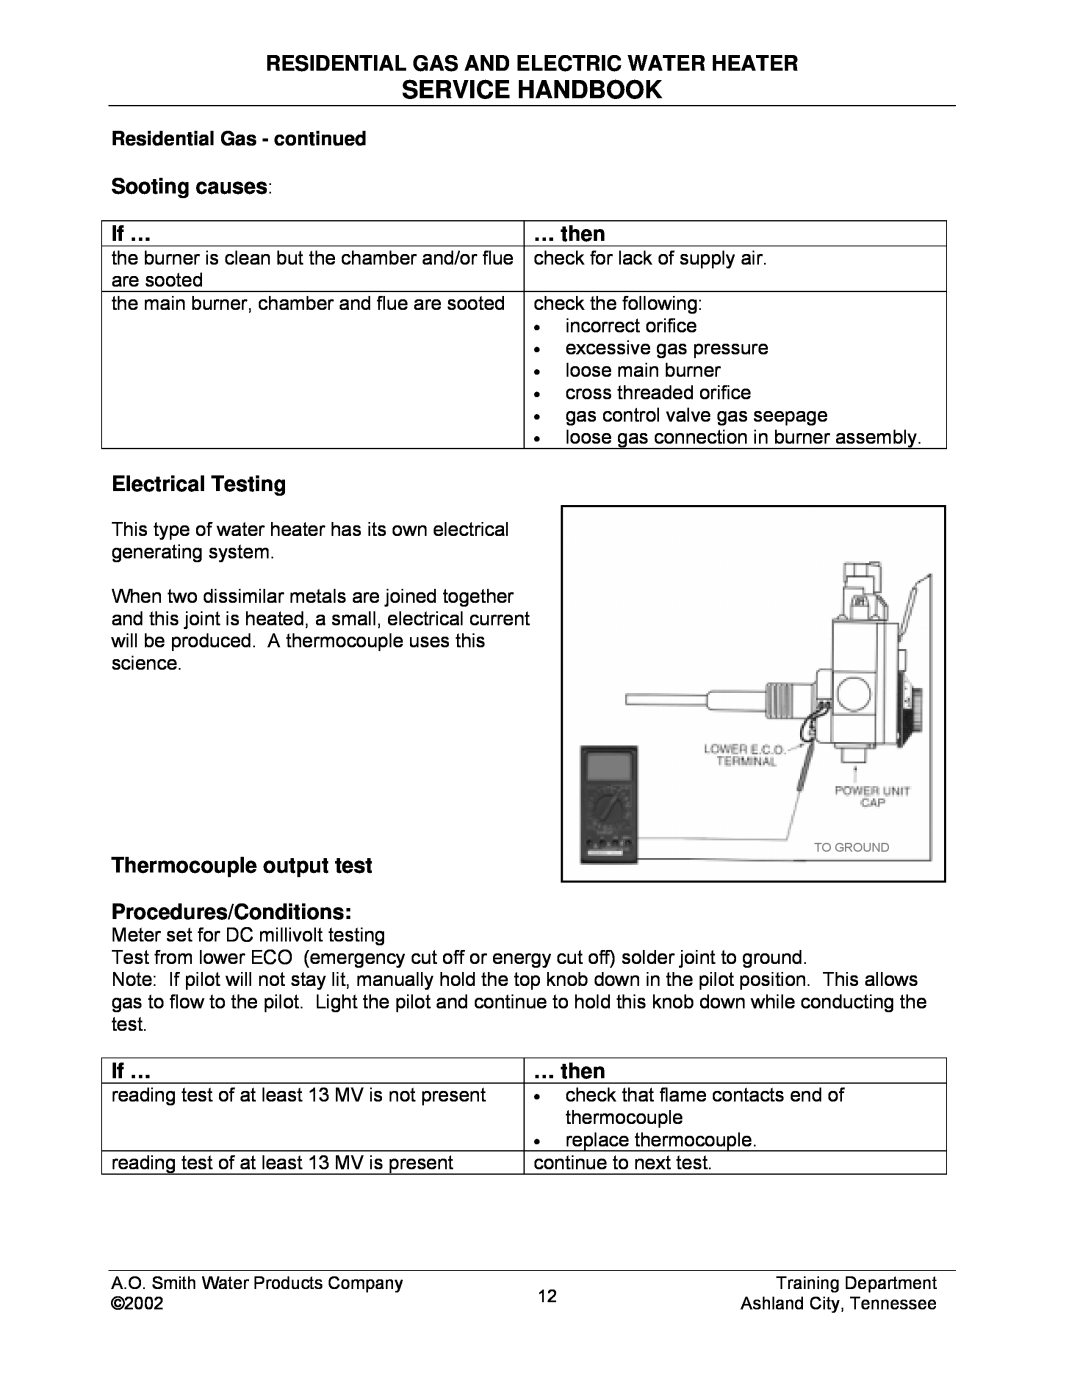 A.O. Smith TC-049-R2 manual Service Handbook, Residential Gas And Electric Water Heater, Sooting causes, If …, … then 